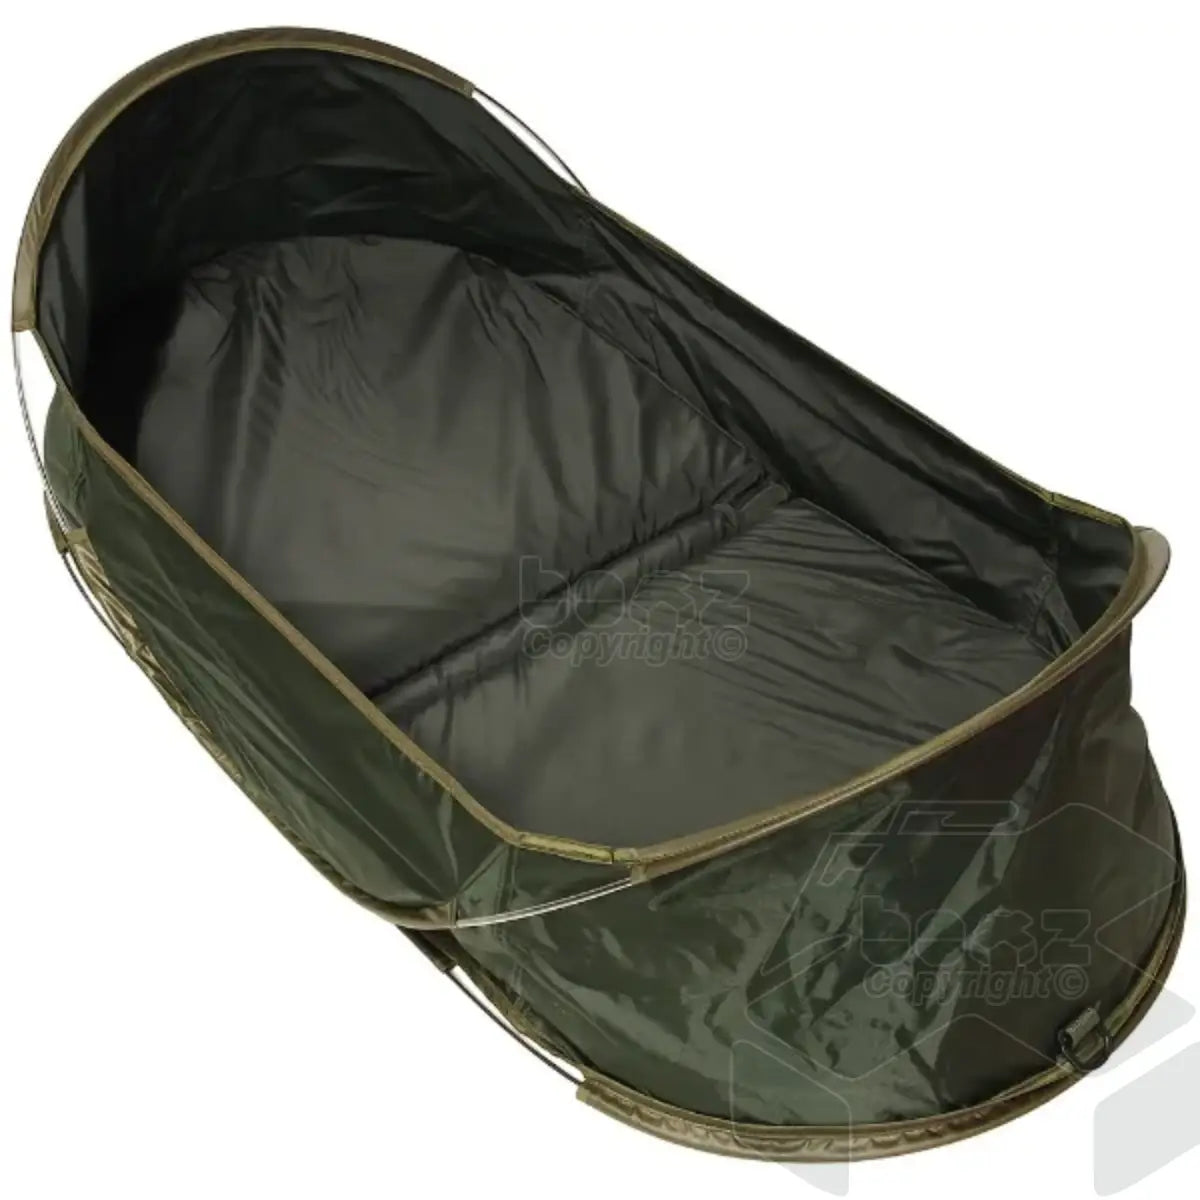 NGT Pop-Up Cradle - Lightweight, Padded with Sides